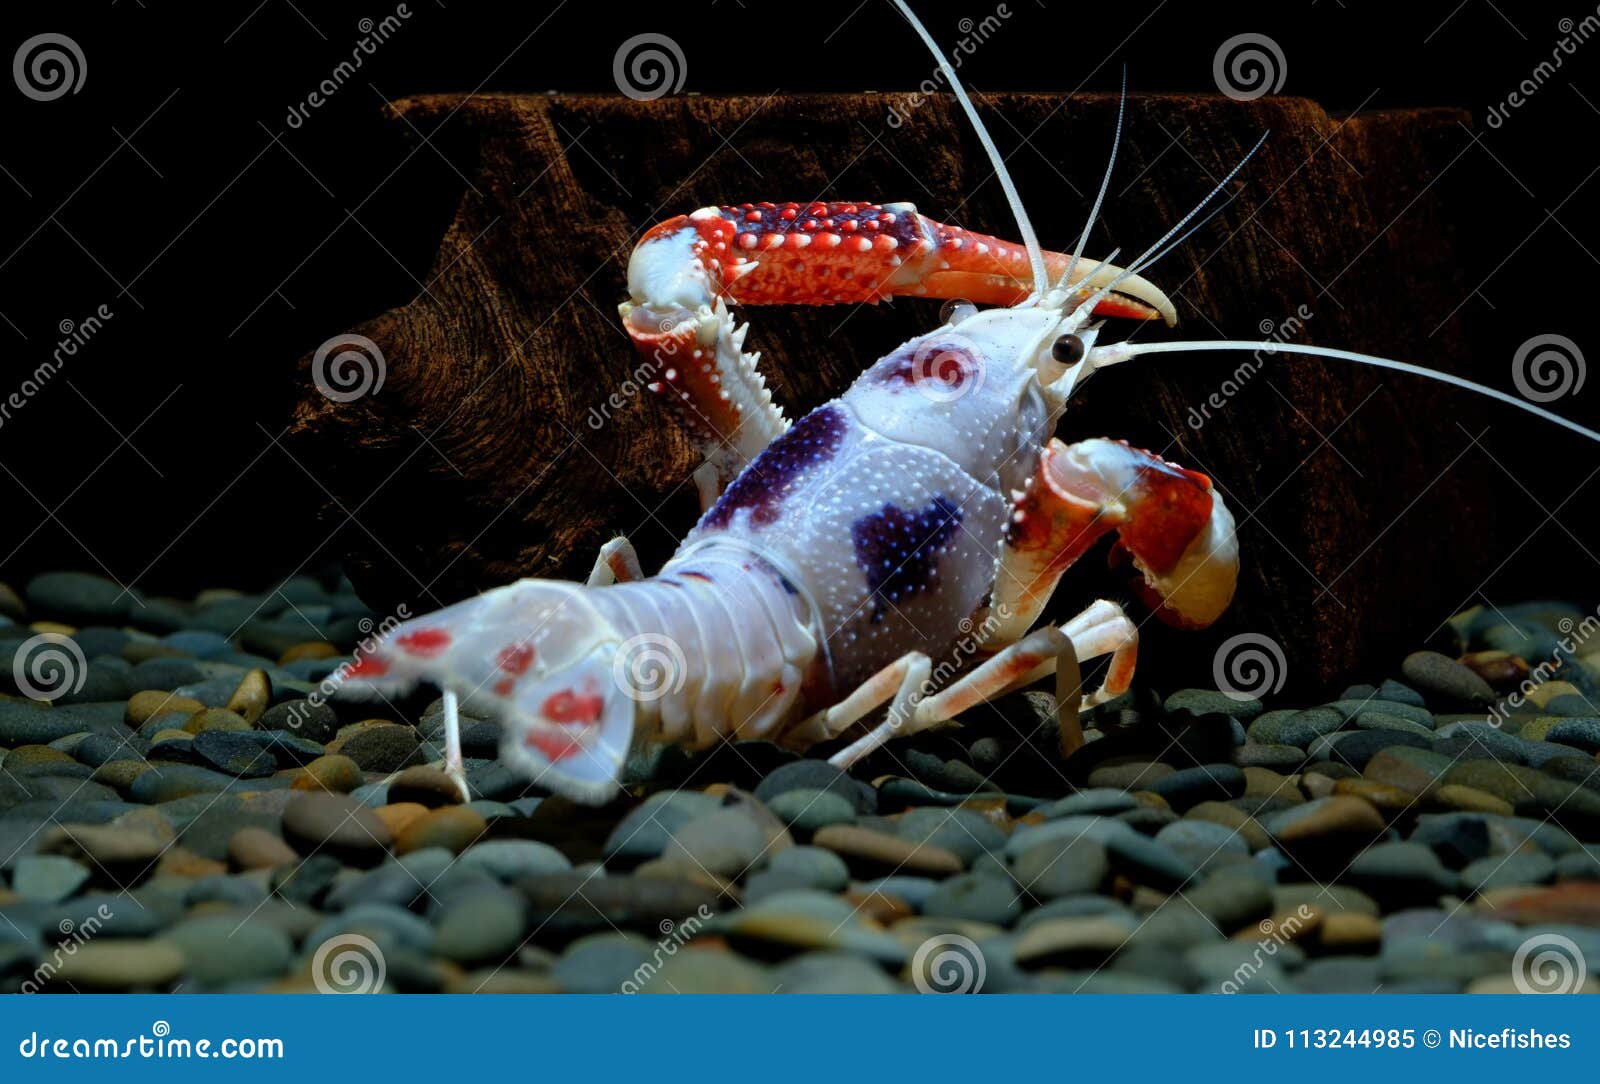 https://thumbs.dreamstime.com/z/crayfish-ghost-aquarium-crayfish-ghost-aquarium-beautiful-color-113244985.jpg